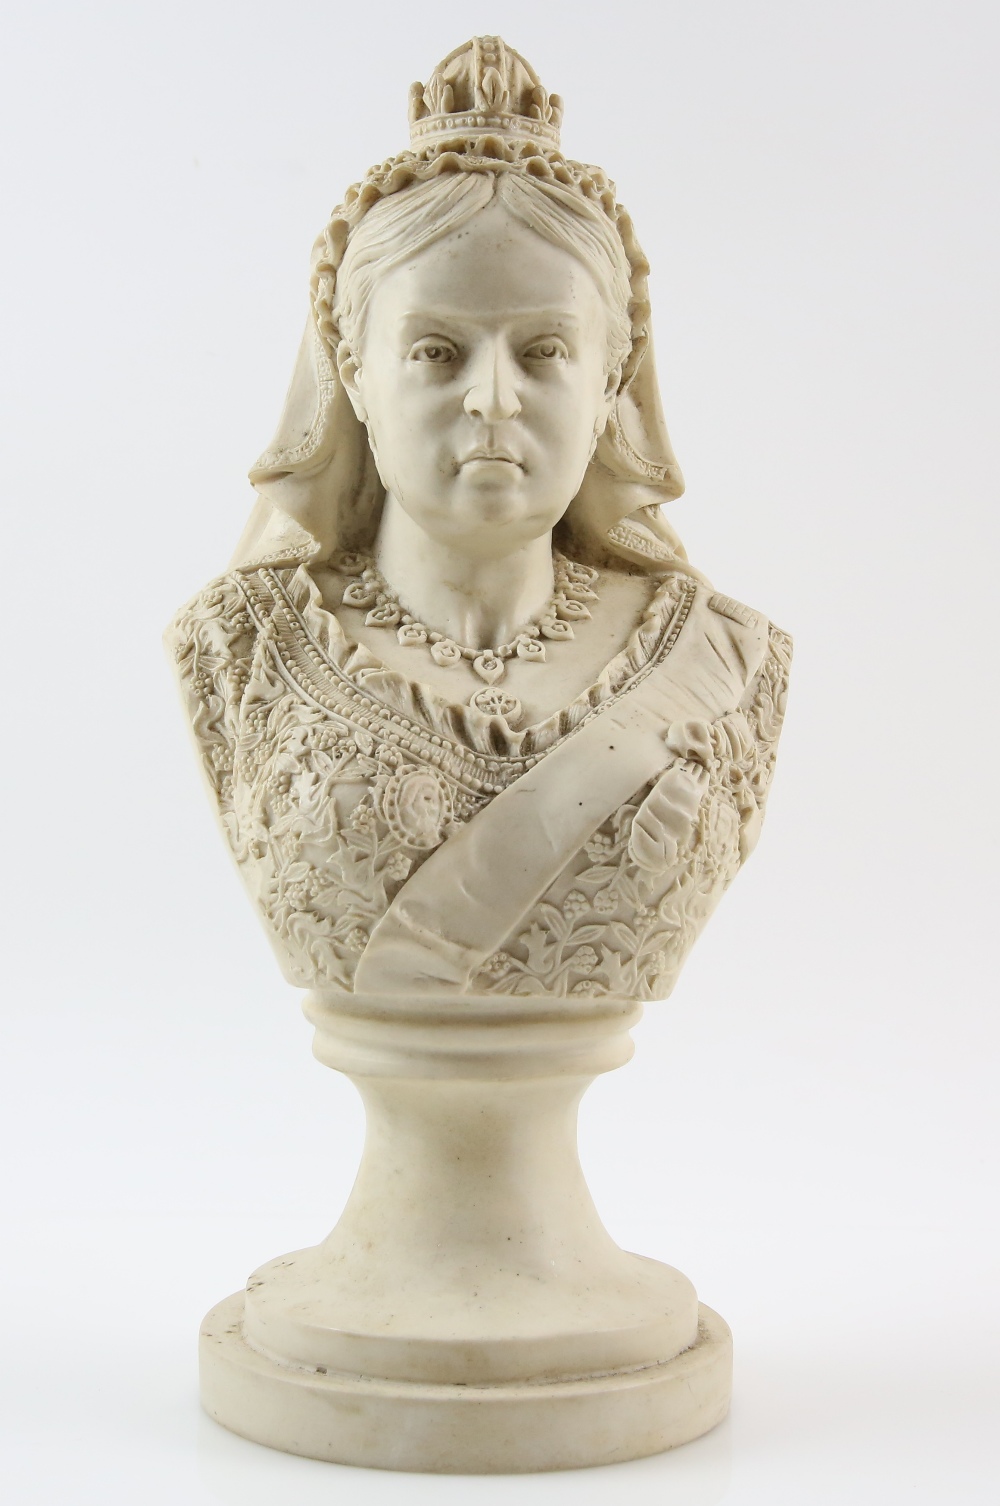 Johnny English (2003) - Queen Victoria composition bust from the movie starring Rowan Atkinson, 38cm